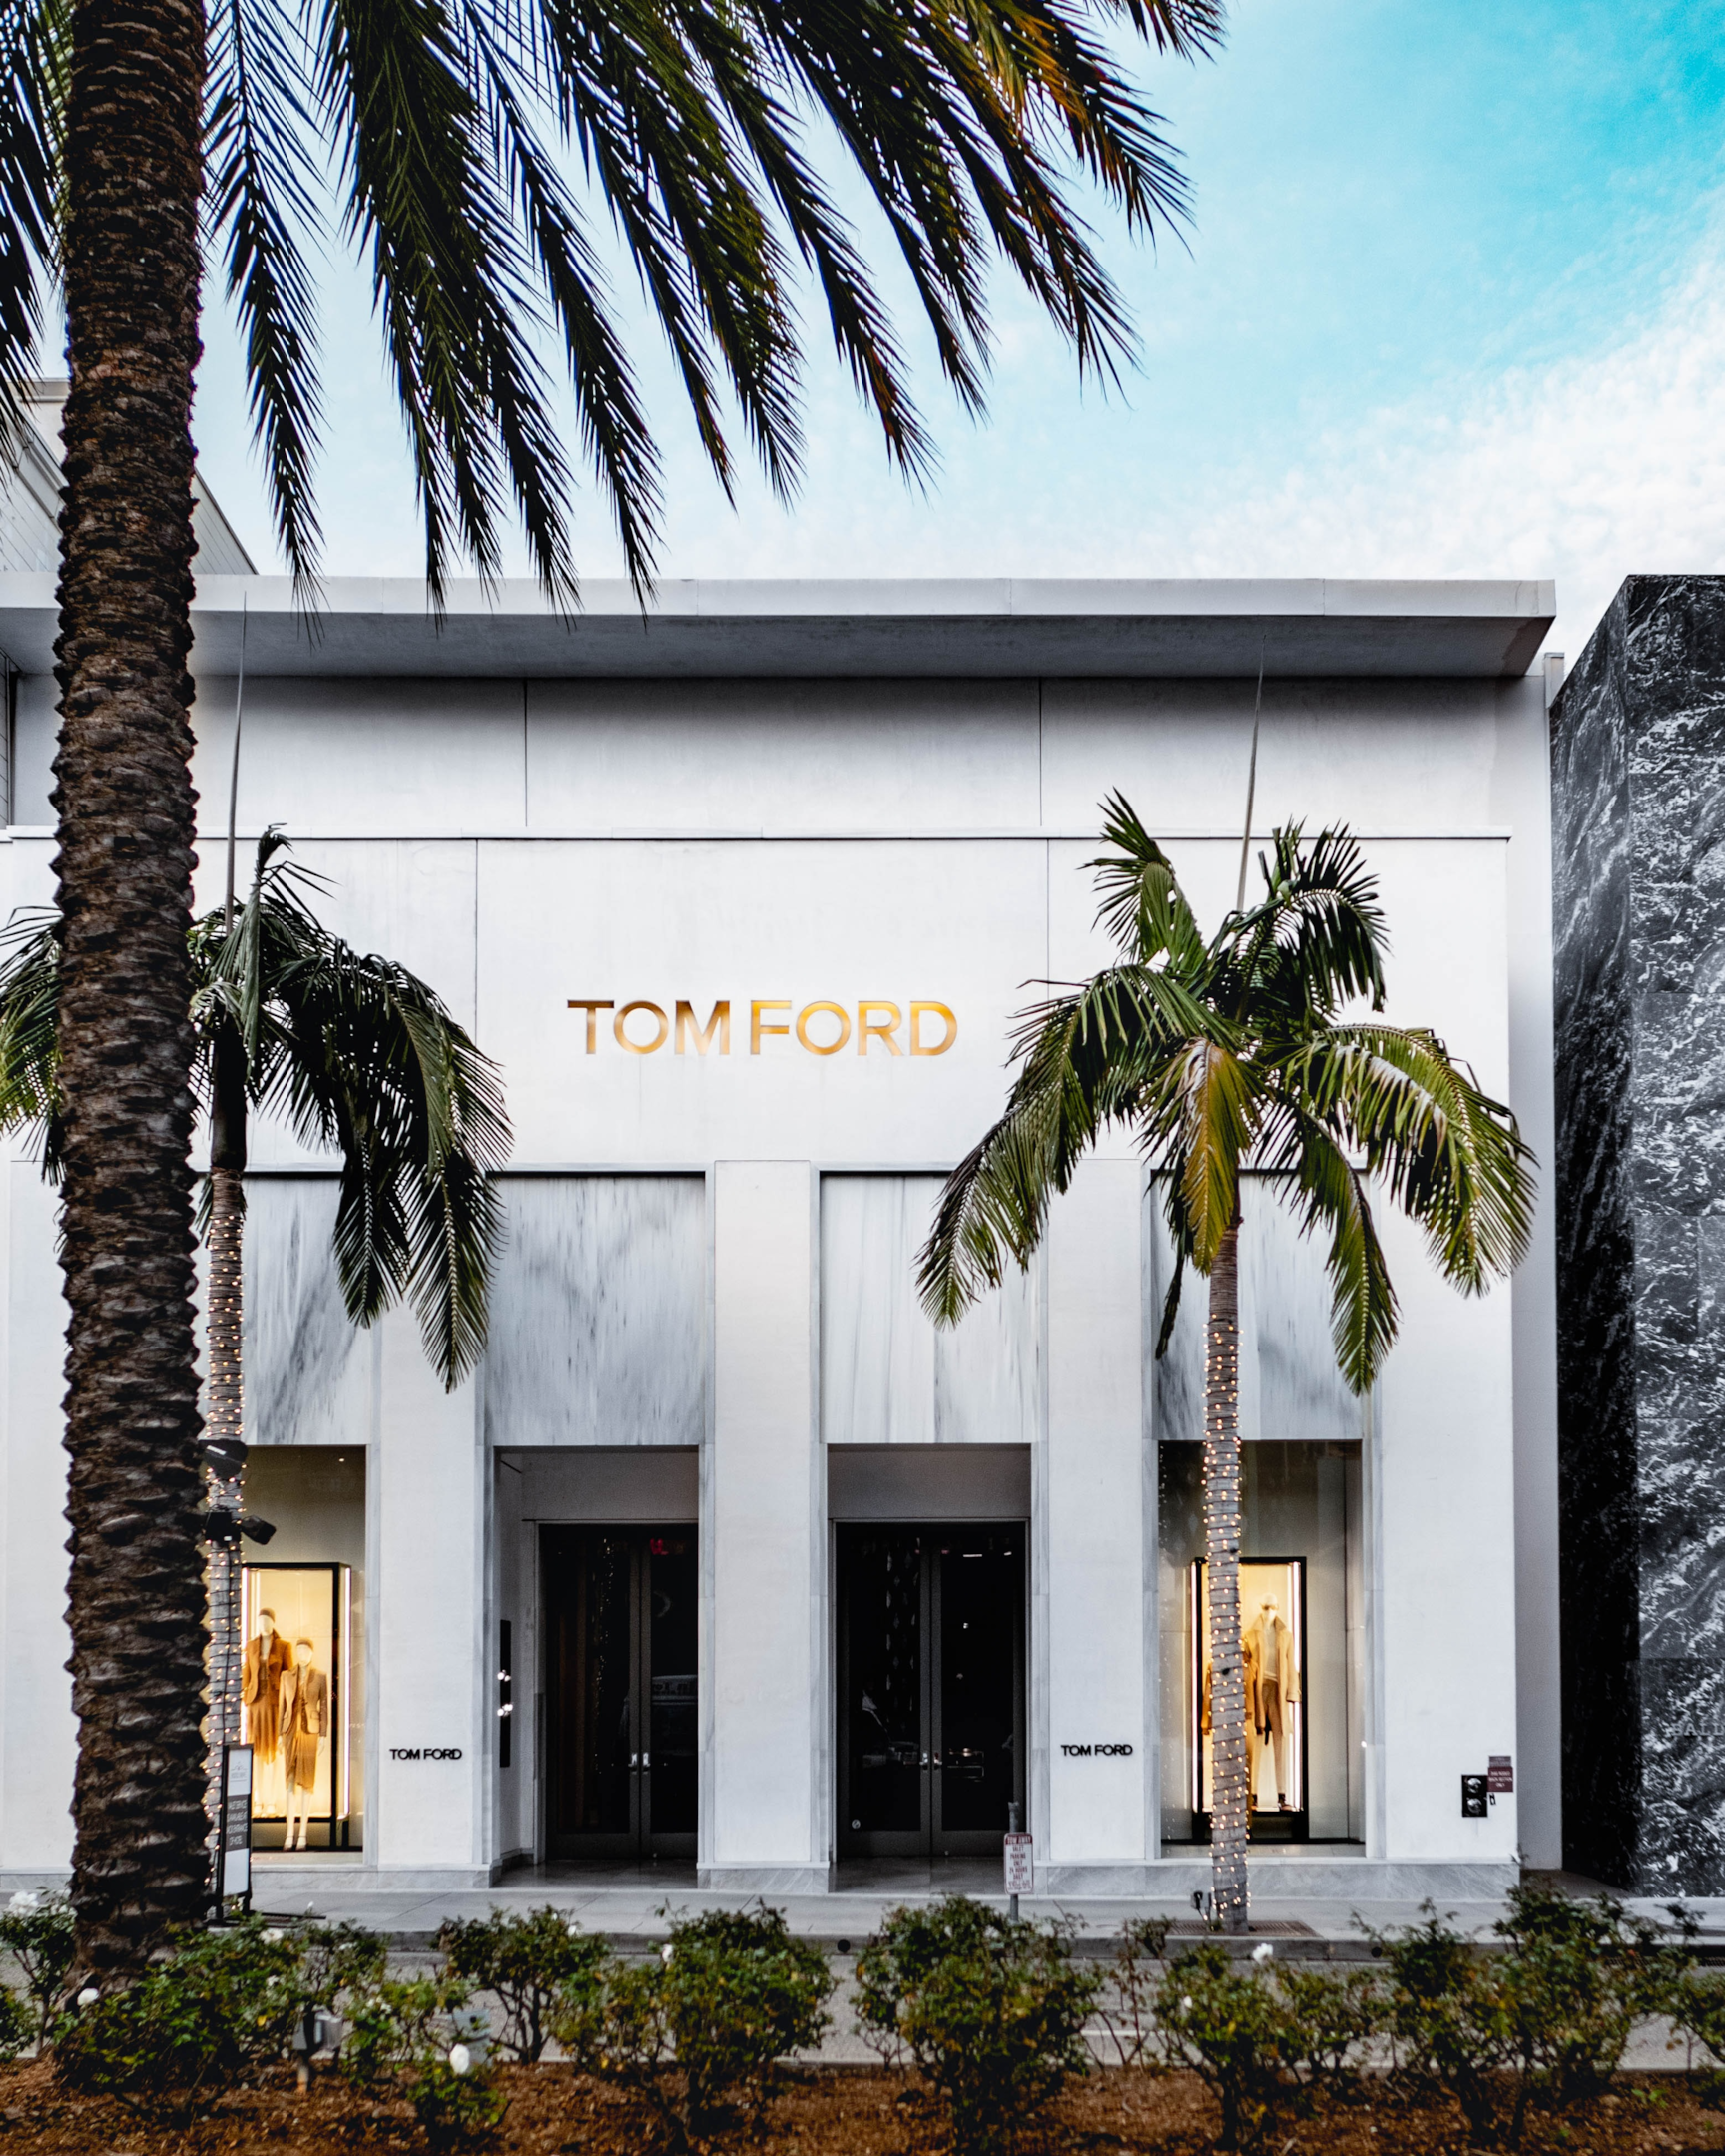 Despite being relatively new compared to other brands, Tom Ford is already considered as one of the top luxury brands | Photo by Rahul Bhogal from Unsplash